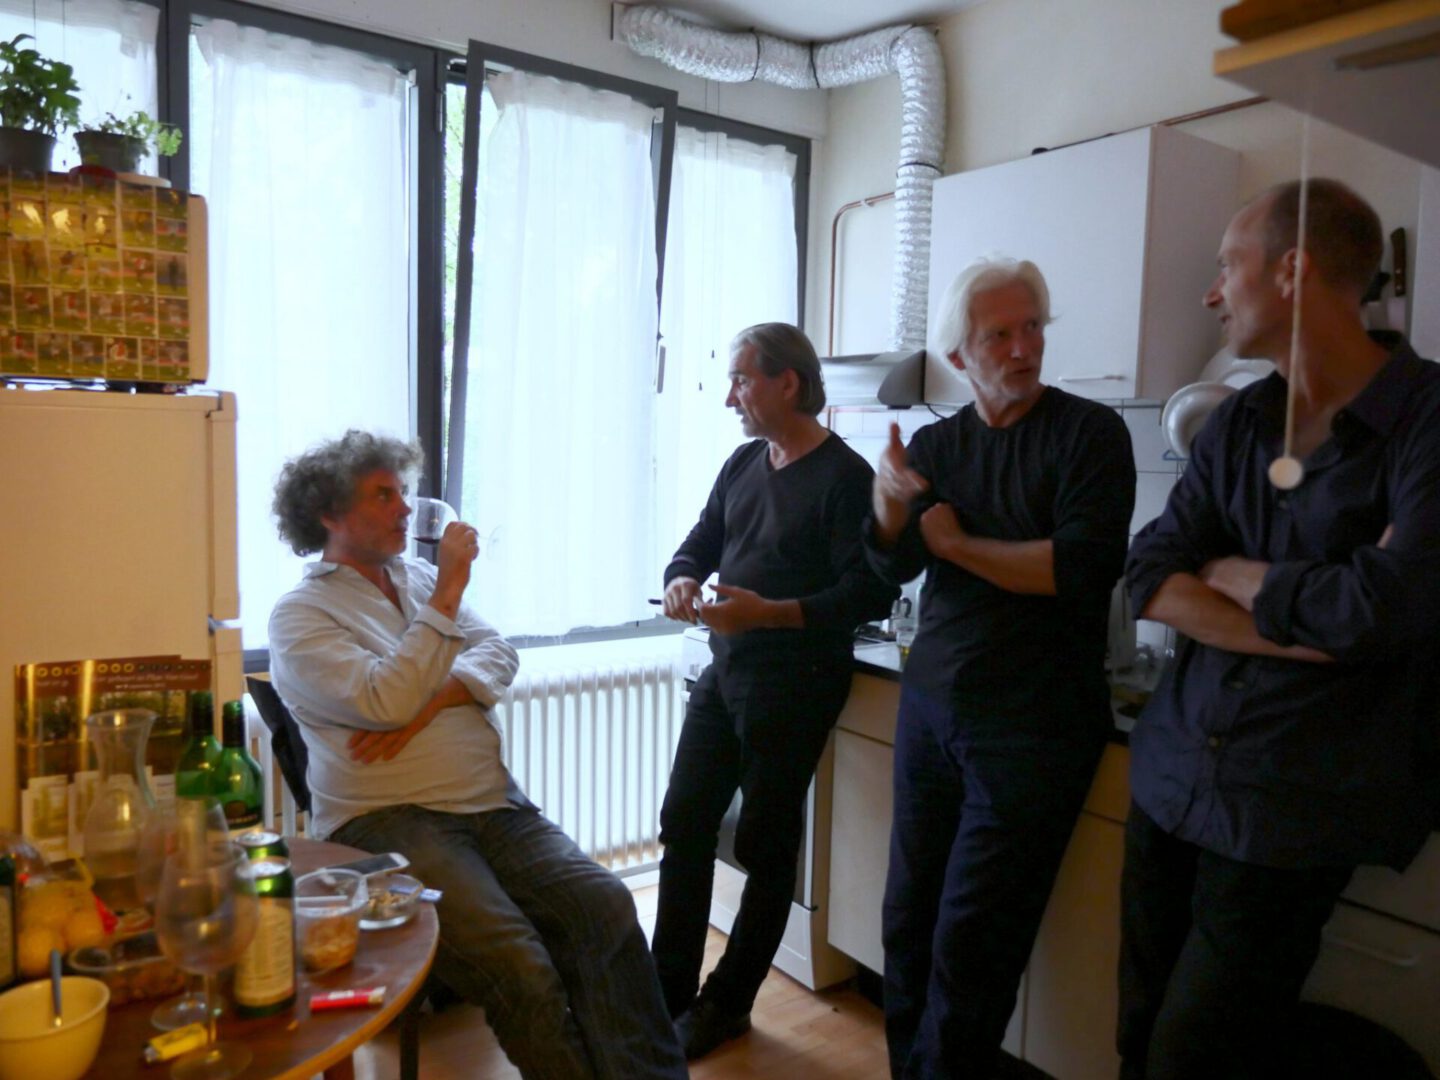 An image of Martyn last and friends in the kitchen of Breed Art Studios 2015